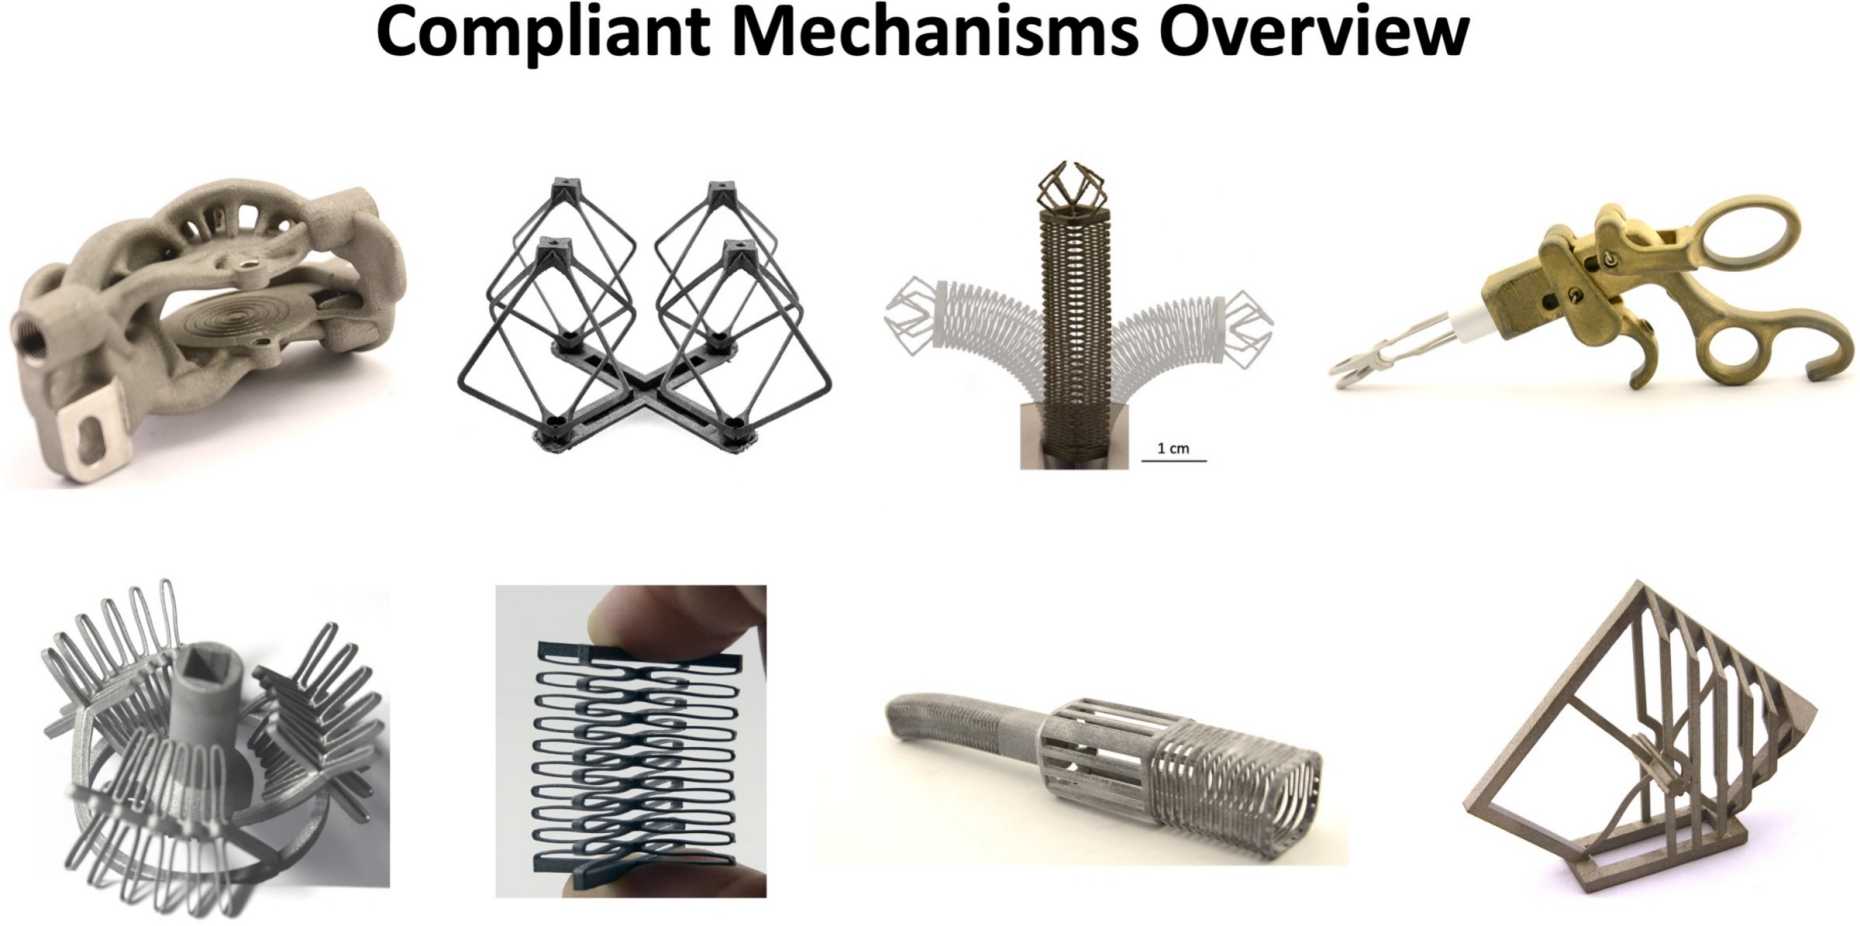 Enlarged view: CompliantMechanisms1